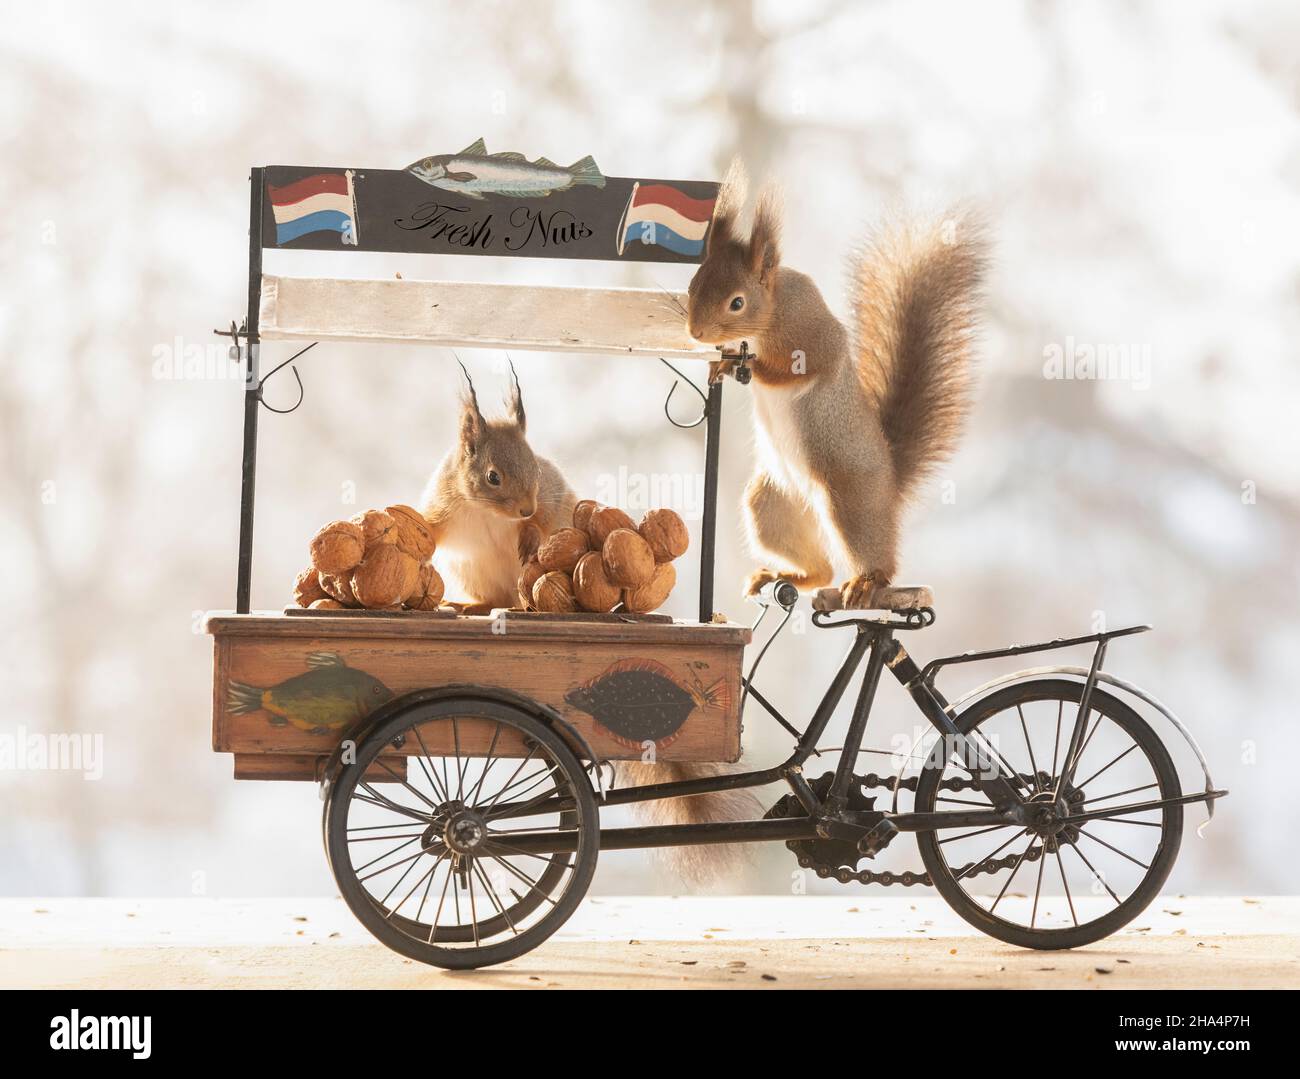 red squirrel sciurus vulgaris,eurasian red squirrel,are standing on a cargo bike with walnuts Stock Photo